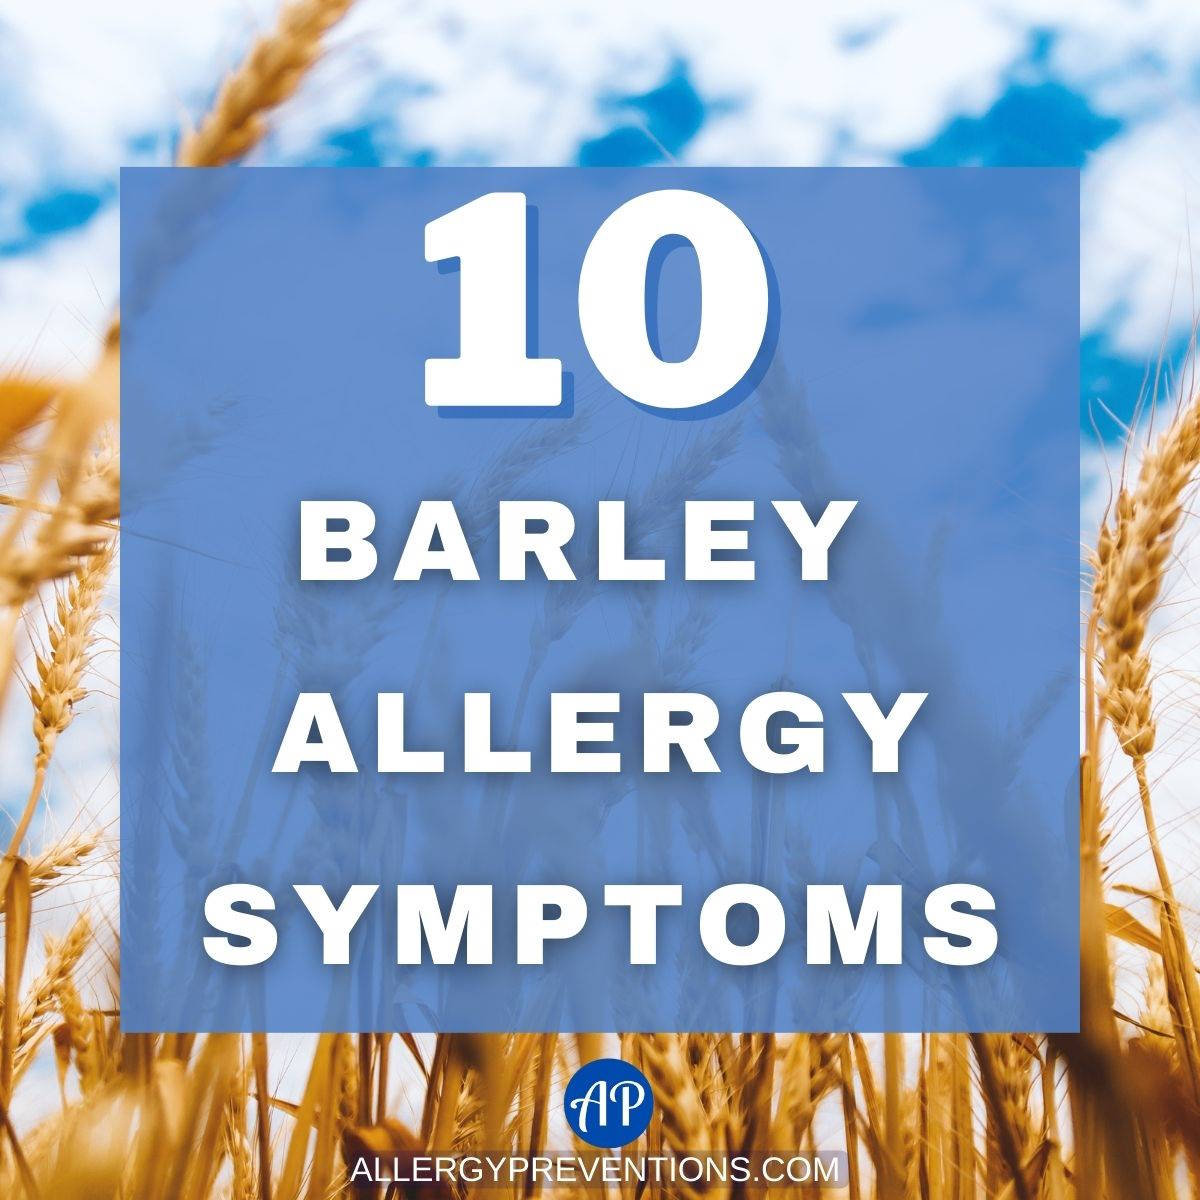 10 Barley Allergy Symptoms You Need to Know